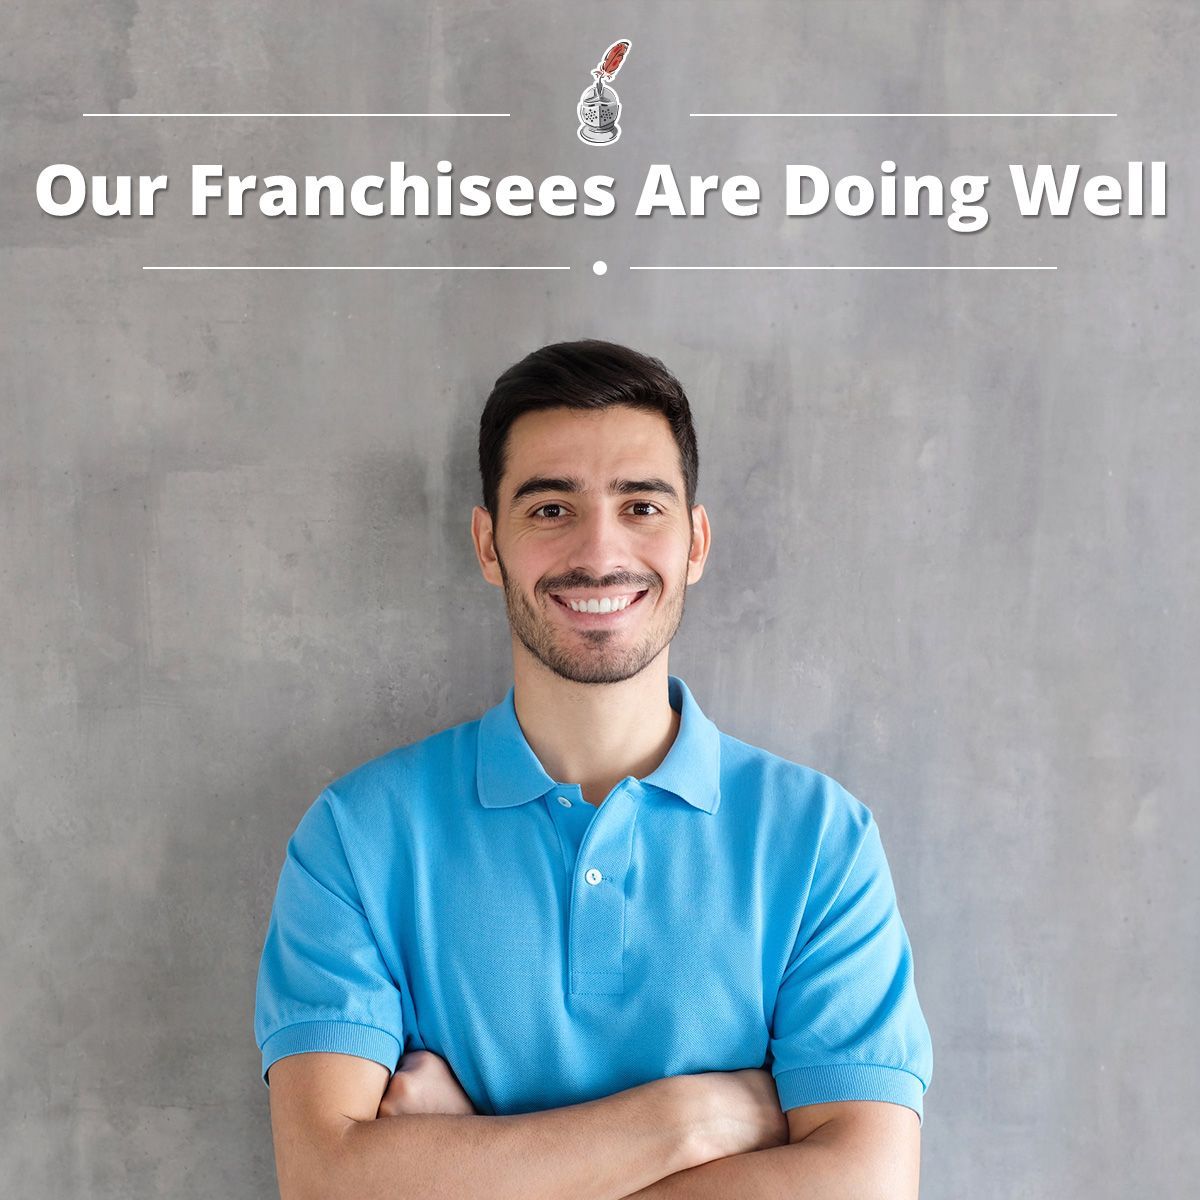 Our Franchisees Are Doing Well